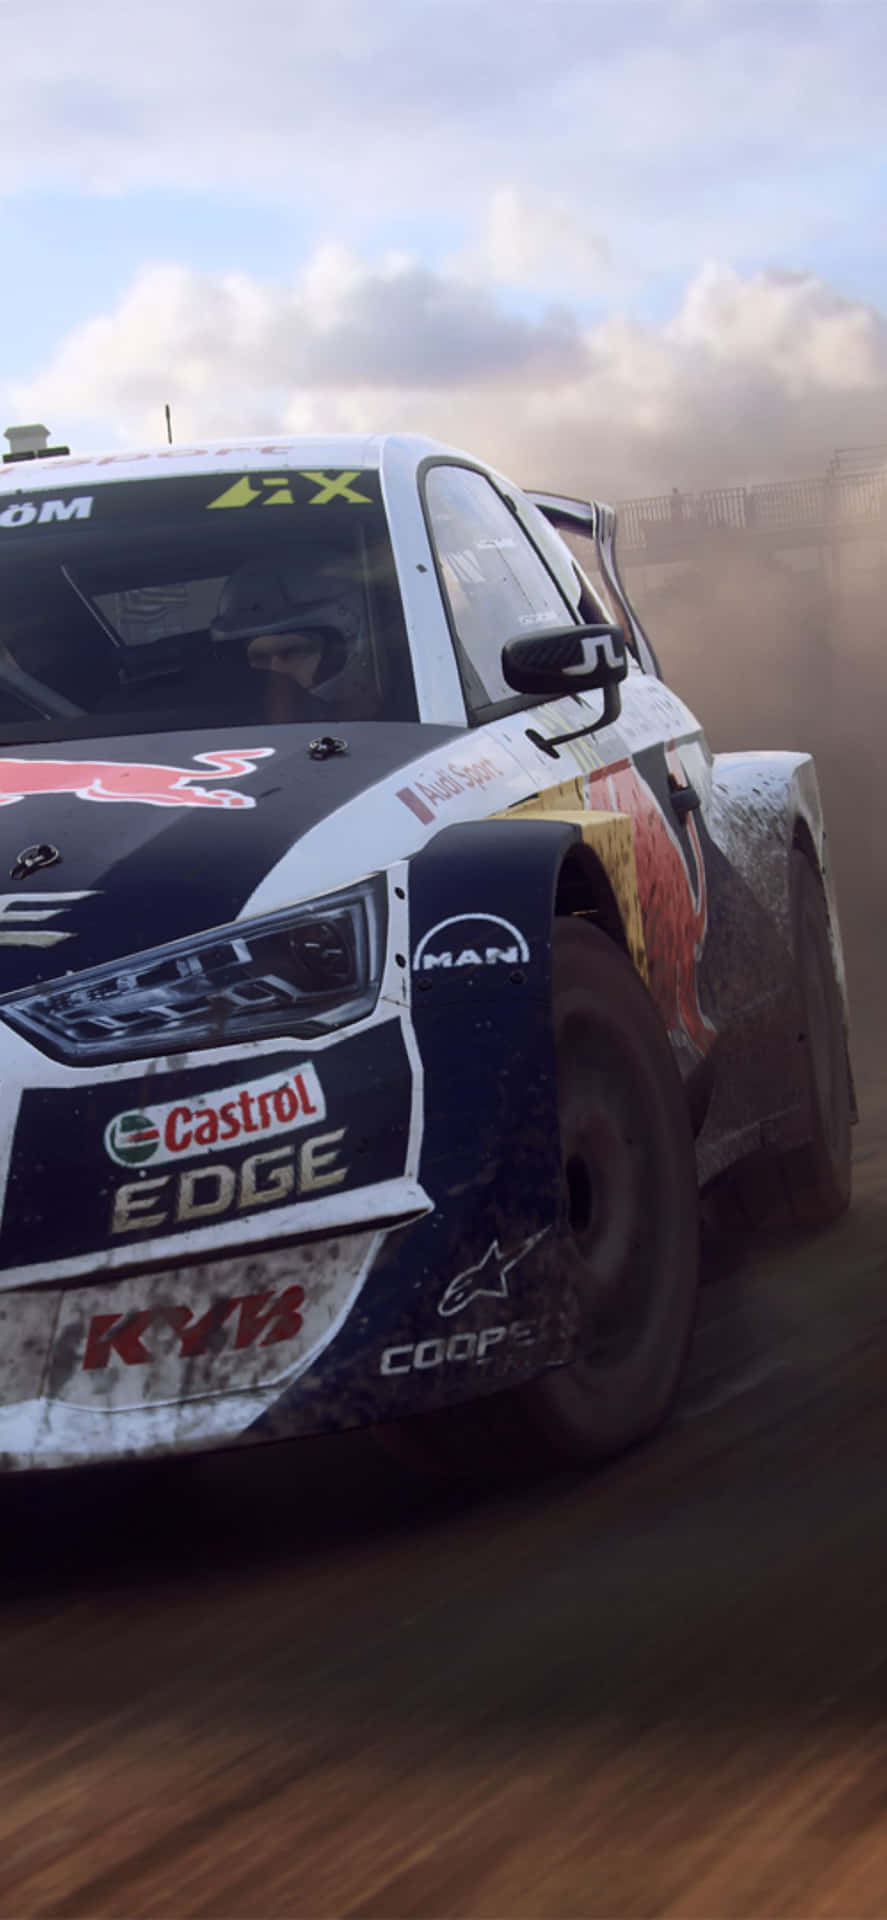 Get ready for some wild dirt rally rides with the Iphone Xs